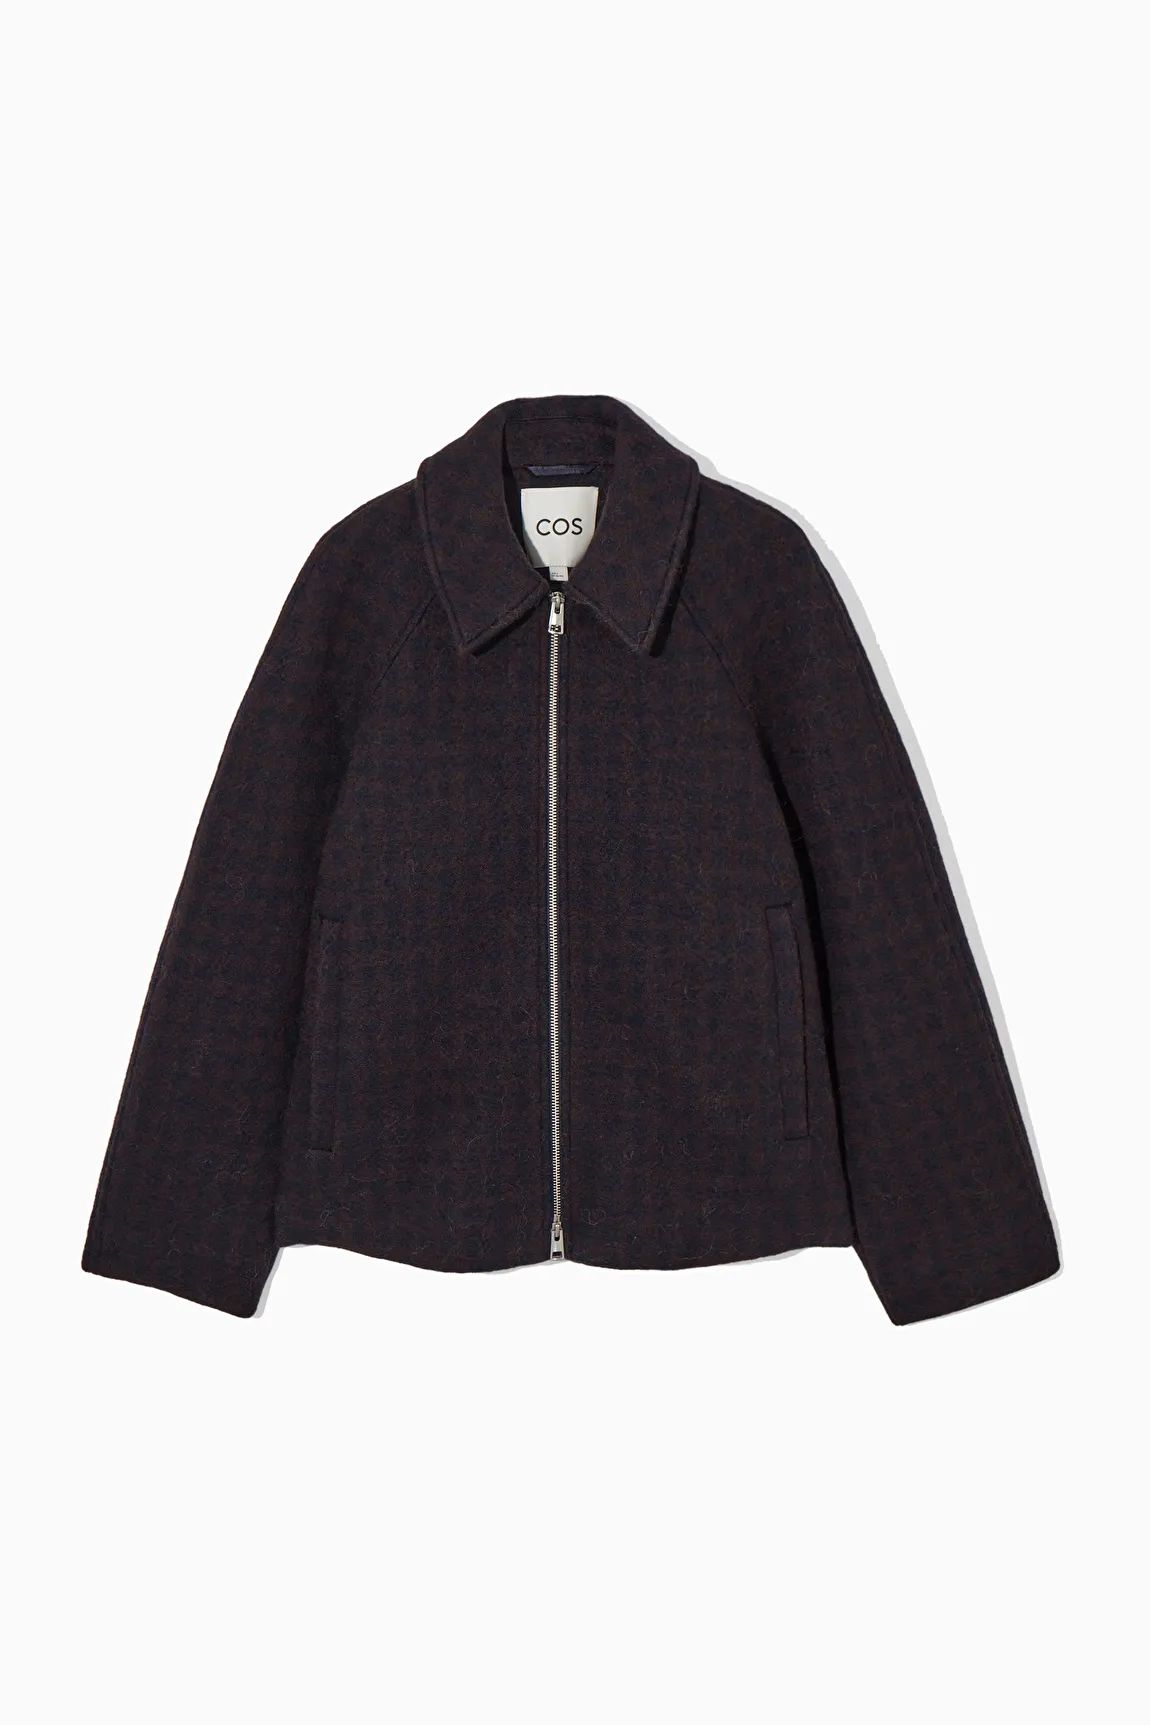 OVERSIZED BOILED-WOOL JACKET - NAVY / CHECKED - COS | COS UK